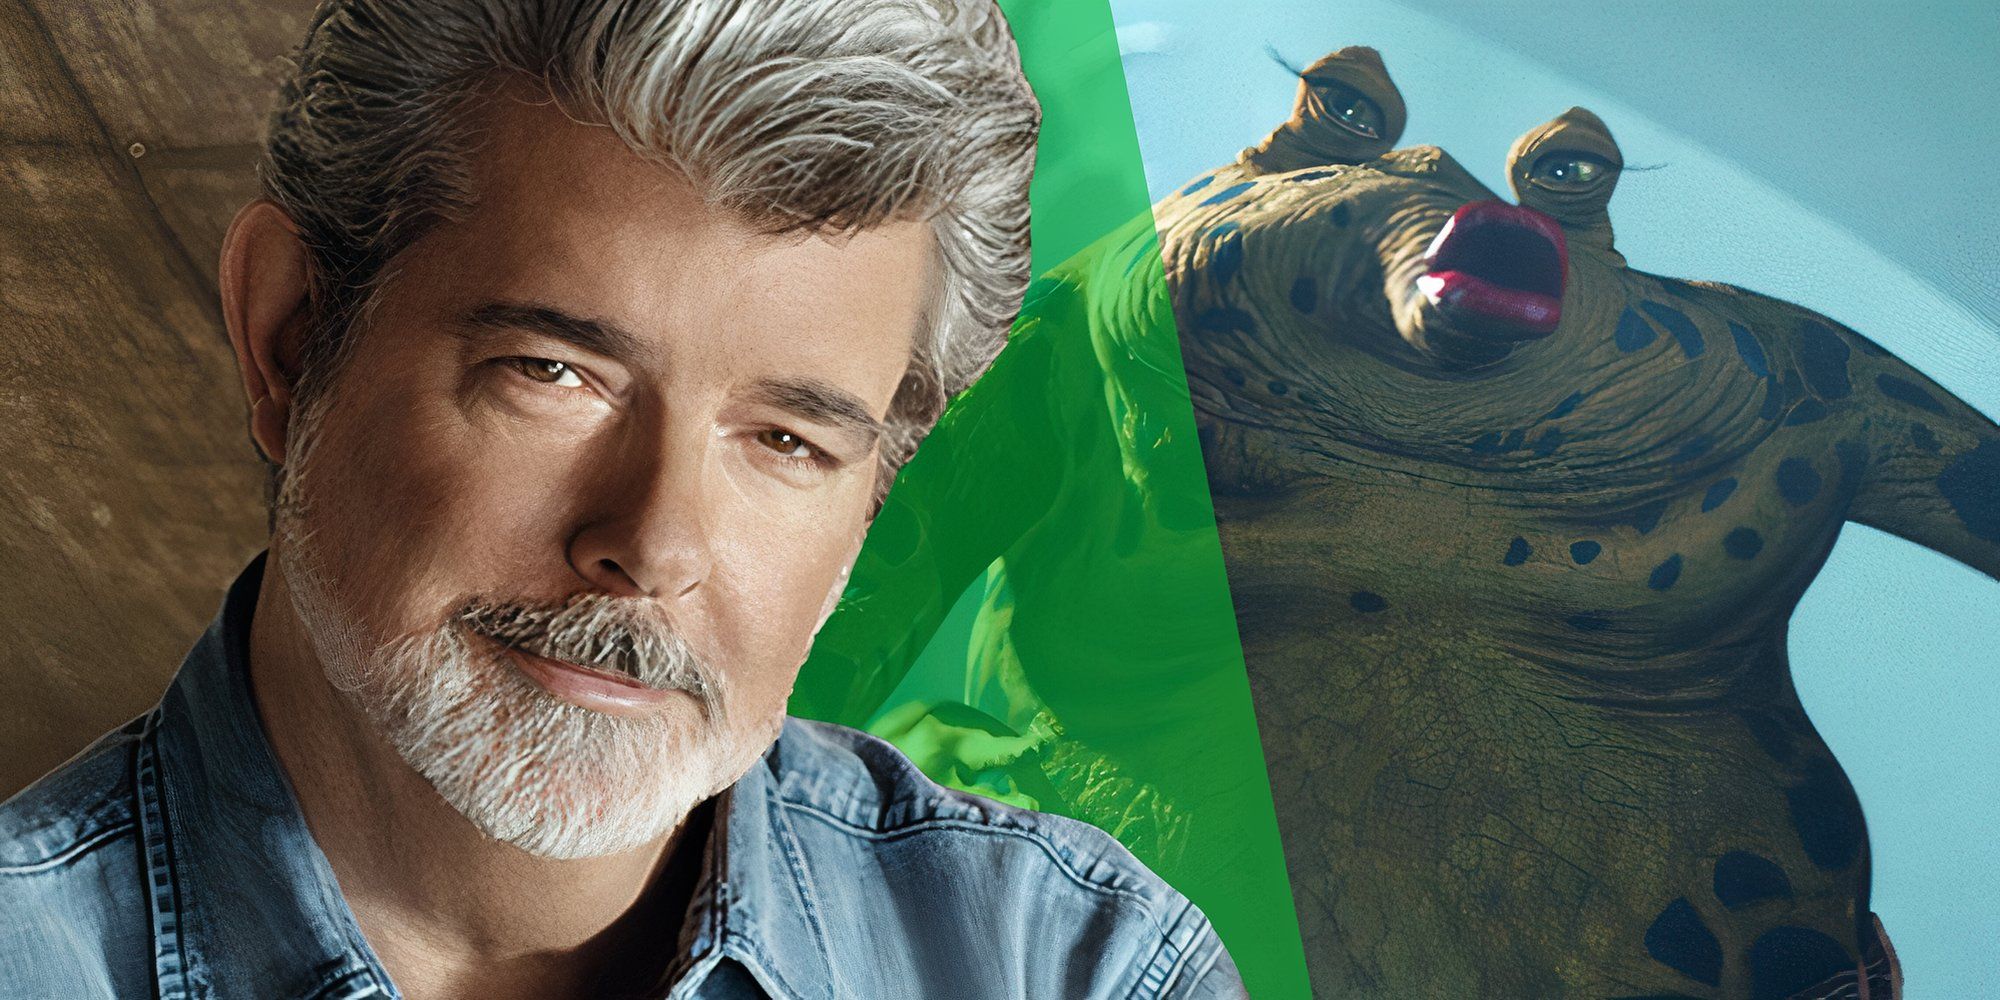 George Lucas next to Sy Snootles from the special edition release of Return of the Jedi (1983)